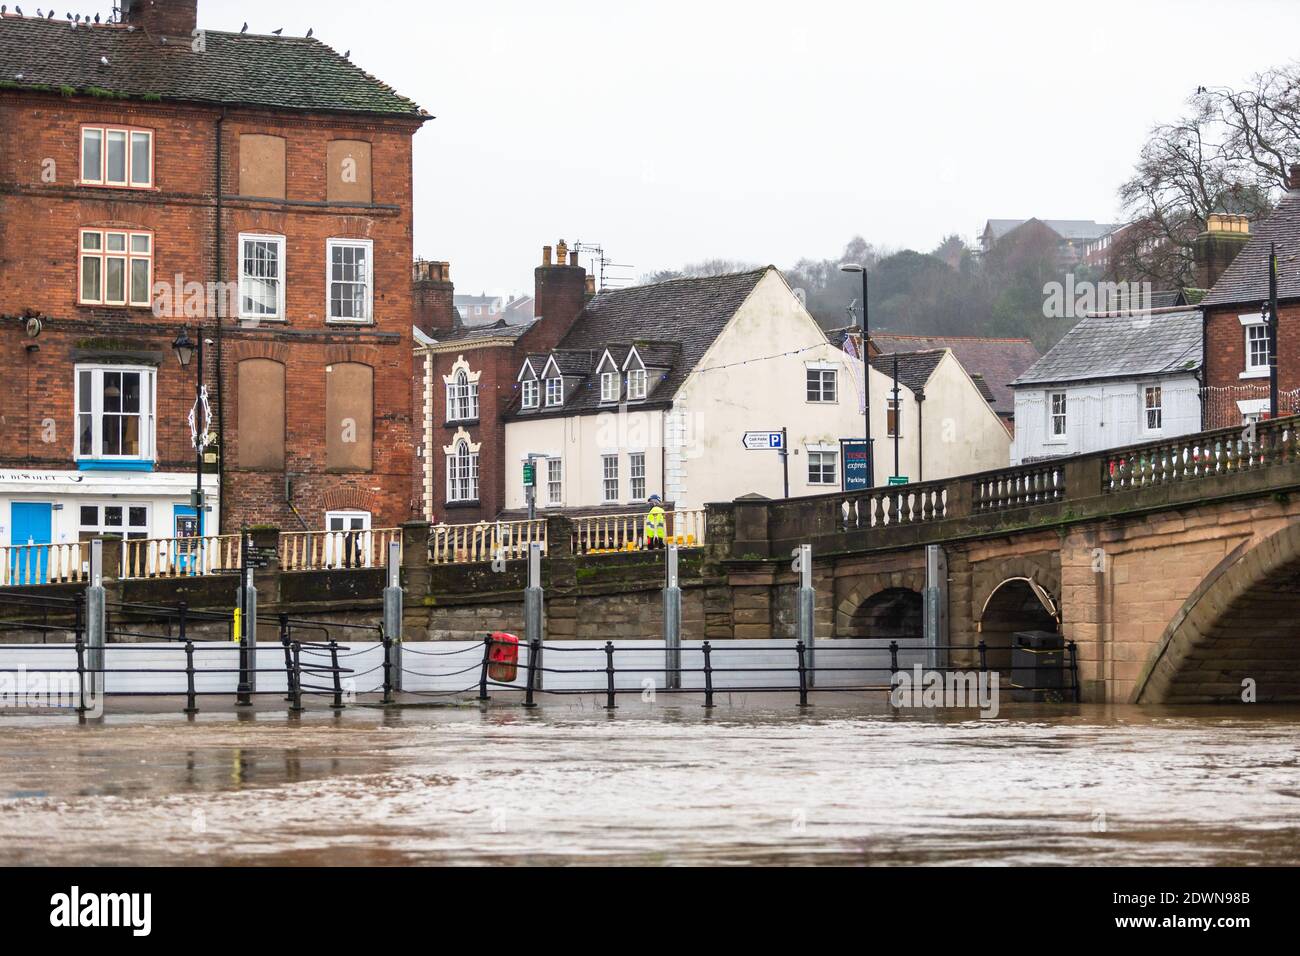 Bewdley, Worcestershire, UK. 23rd Dec, 2020. Just two days before Christmas recent rain has raised the level of the River Severn in Bewdley, Worcestershire. The Environment Agency is erecting barriers to protect properties and businesses from flooding. More rain is on its way over the next two days. Credit: Peter Lopeman/Alamy Live News Stock Photo